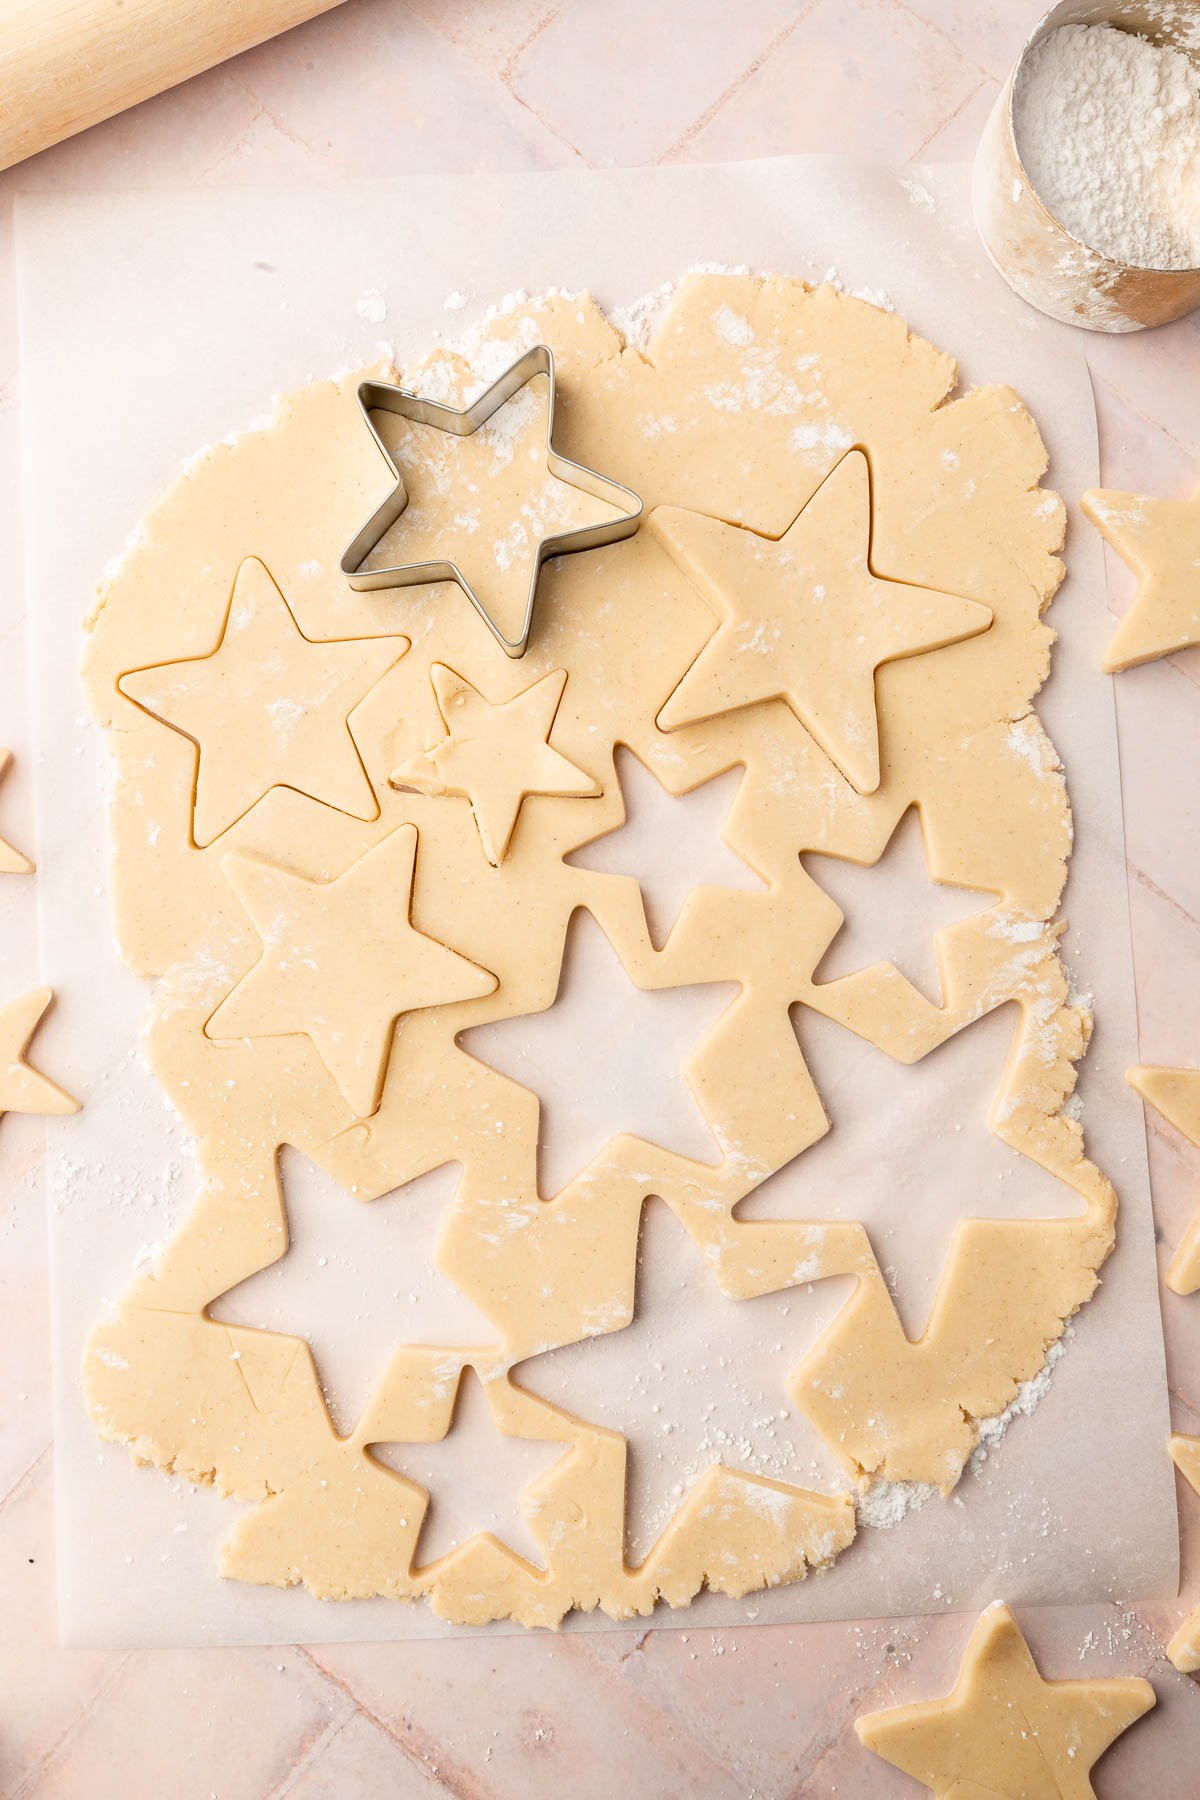 An overhead view of rolled out gluten free sugar cookie dough on a piece of parchment paper with several stars cut out of it with star shaped cookie cutters.